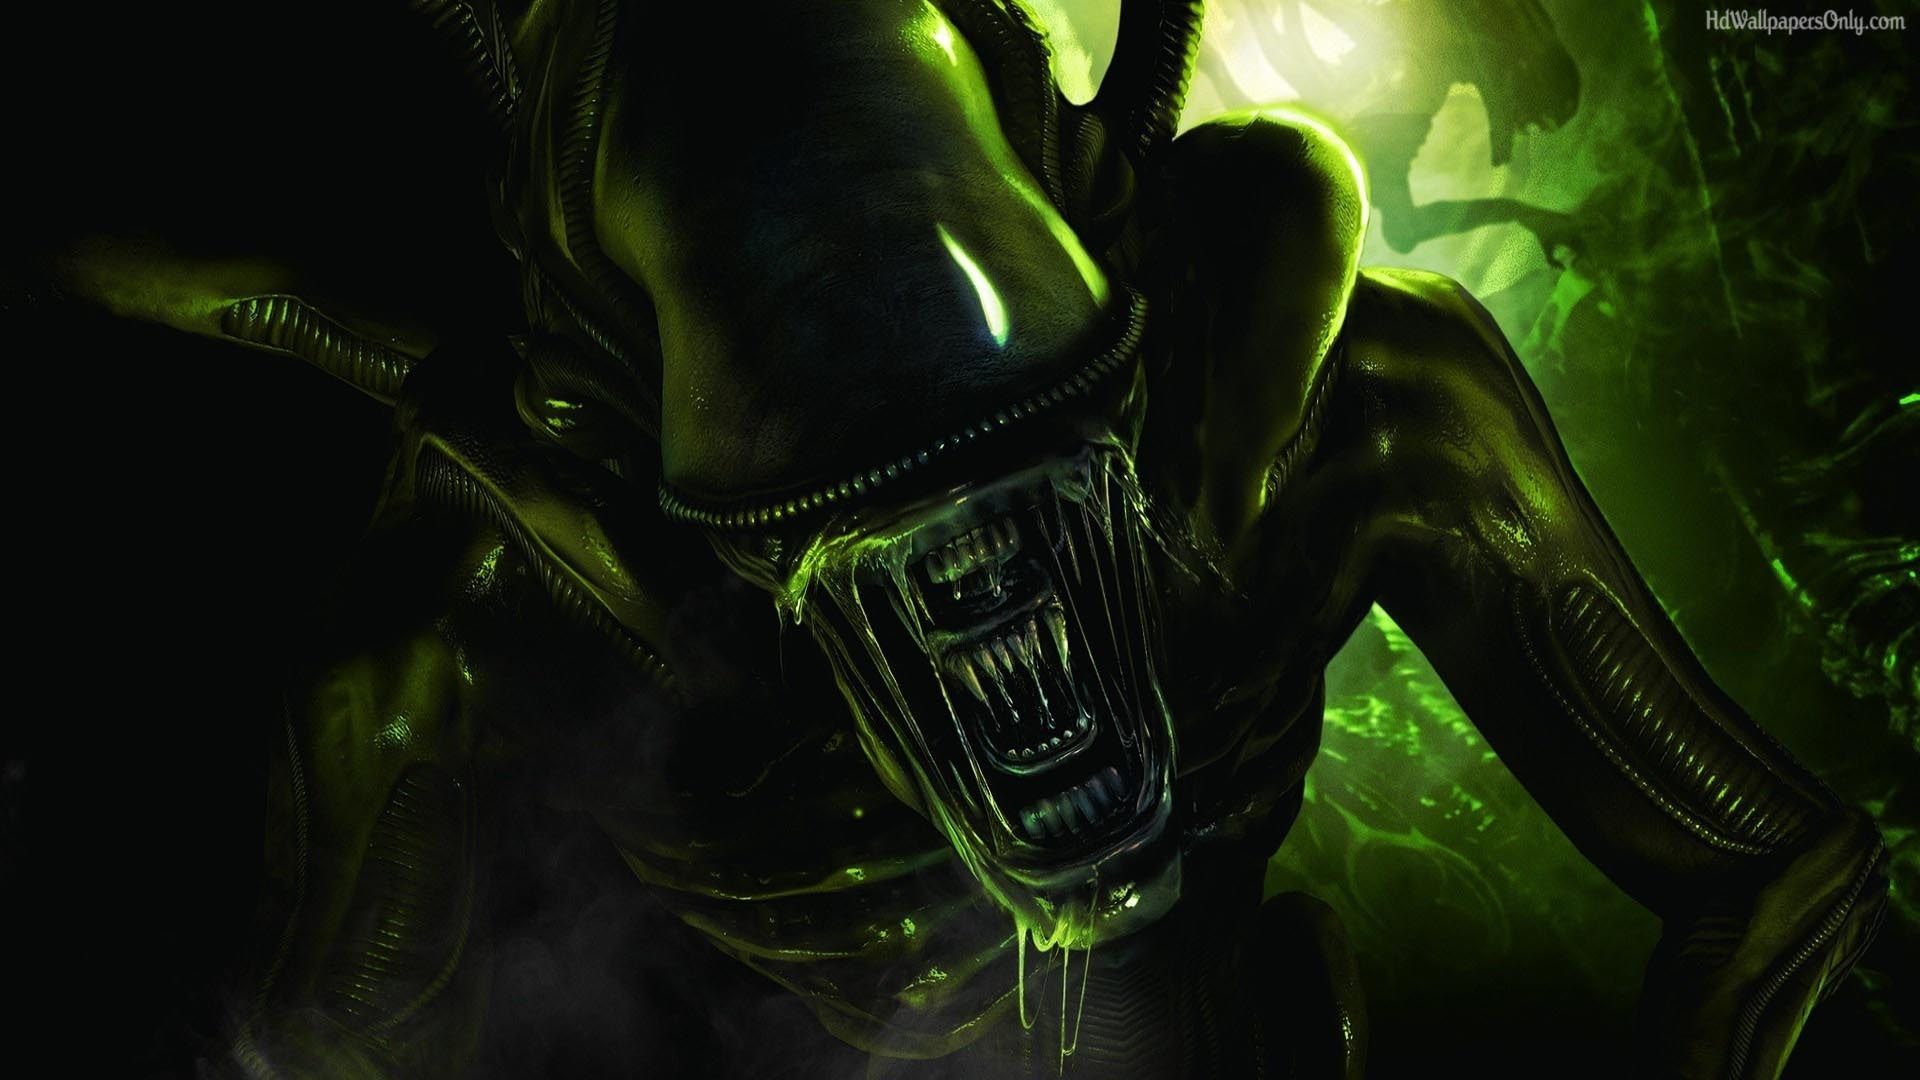 alien pictures hd 1080p hd wallpapers onlyhd wallpapers only